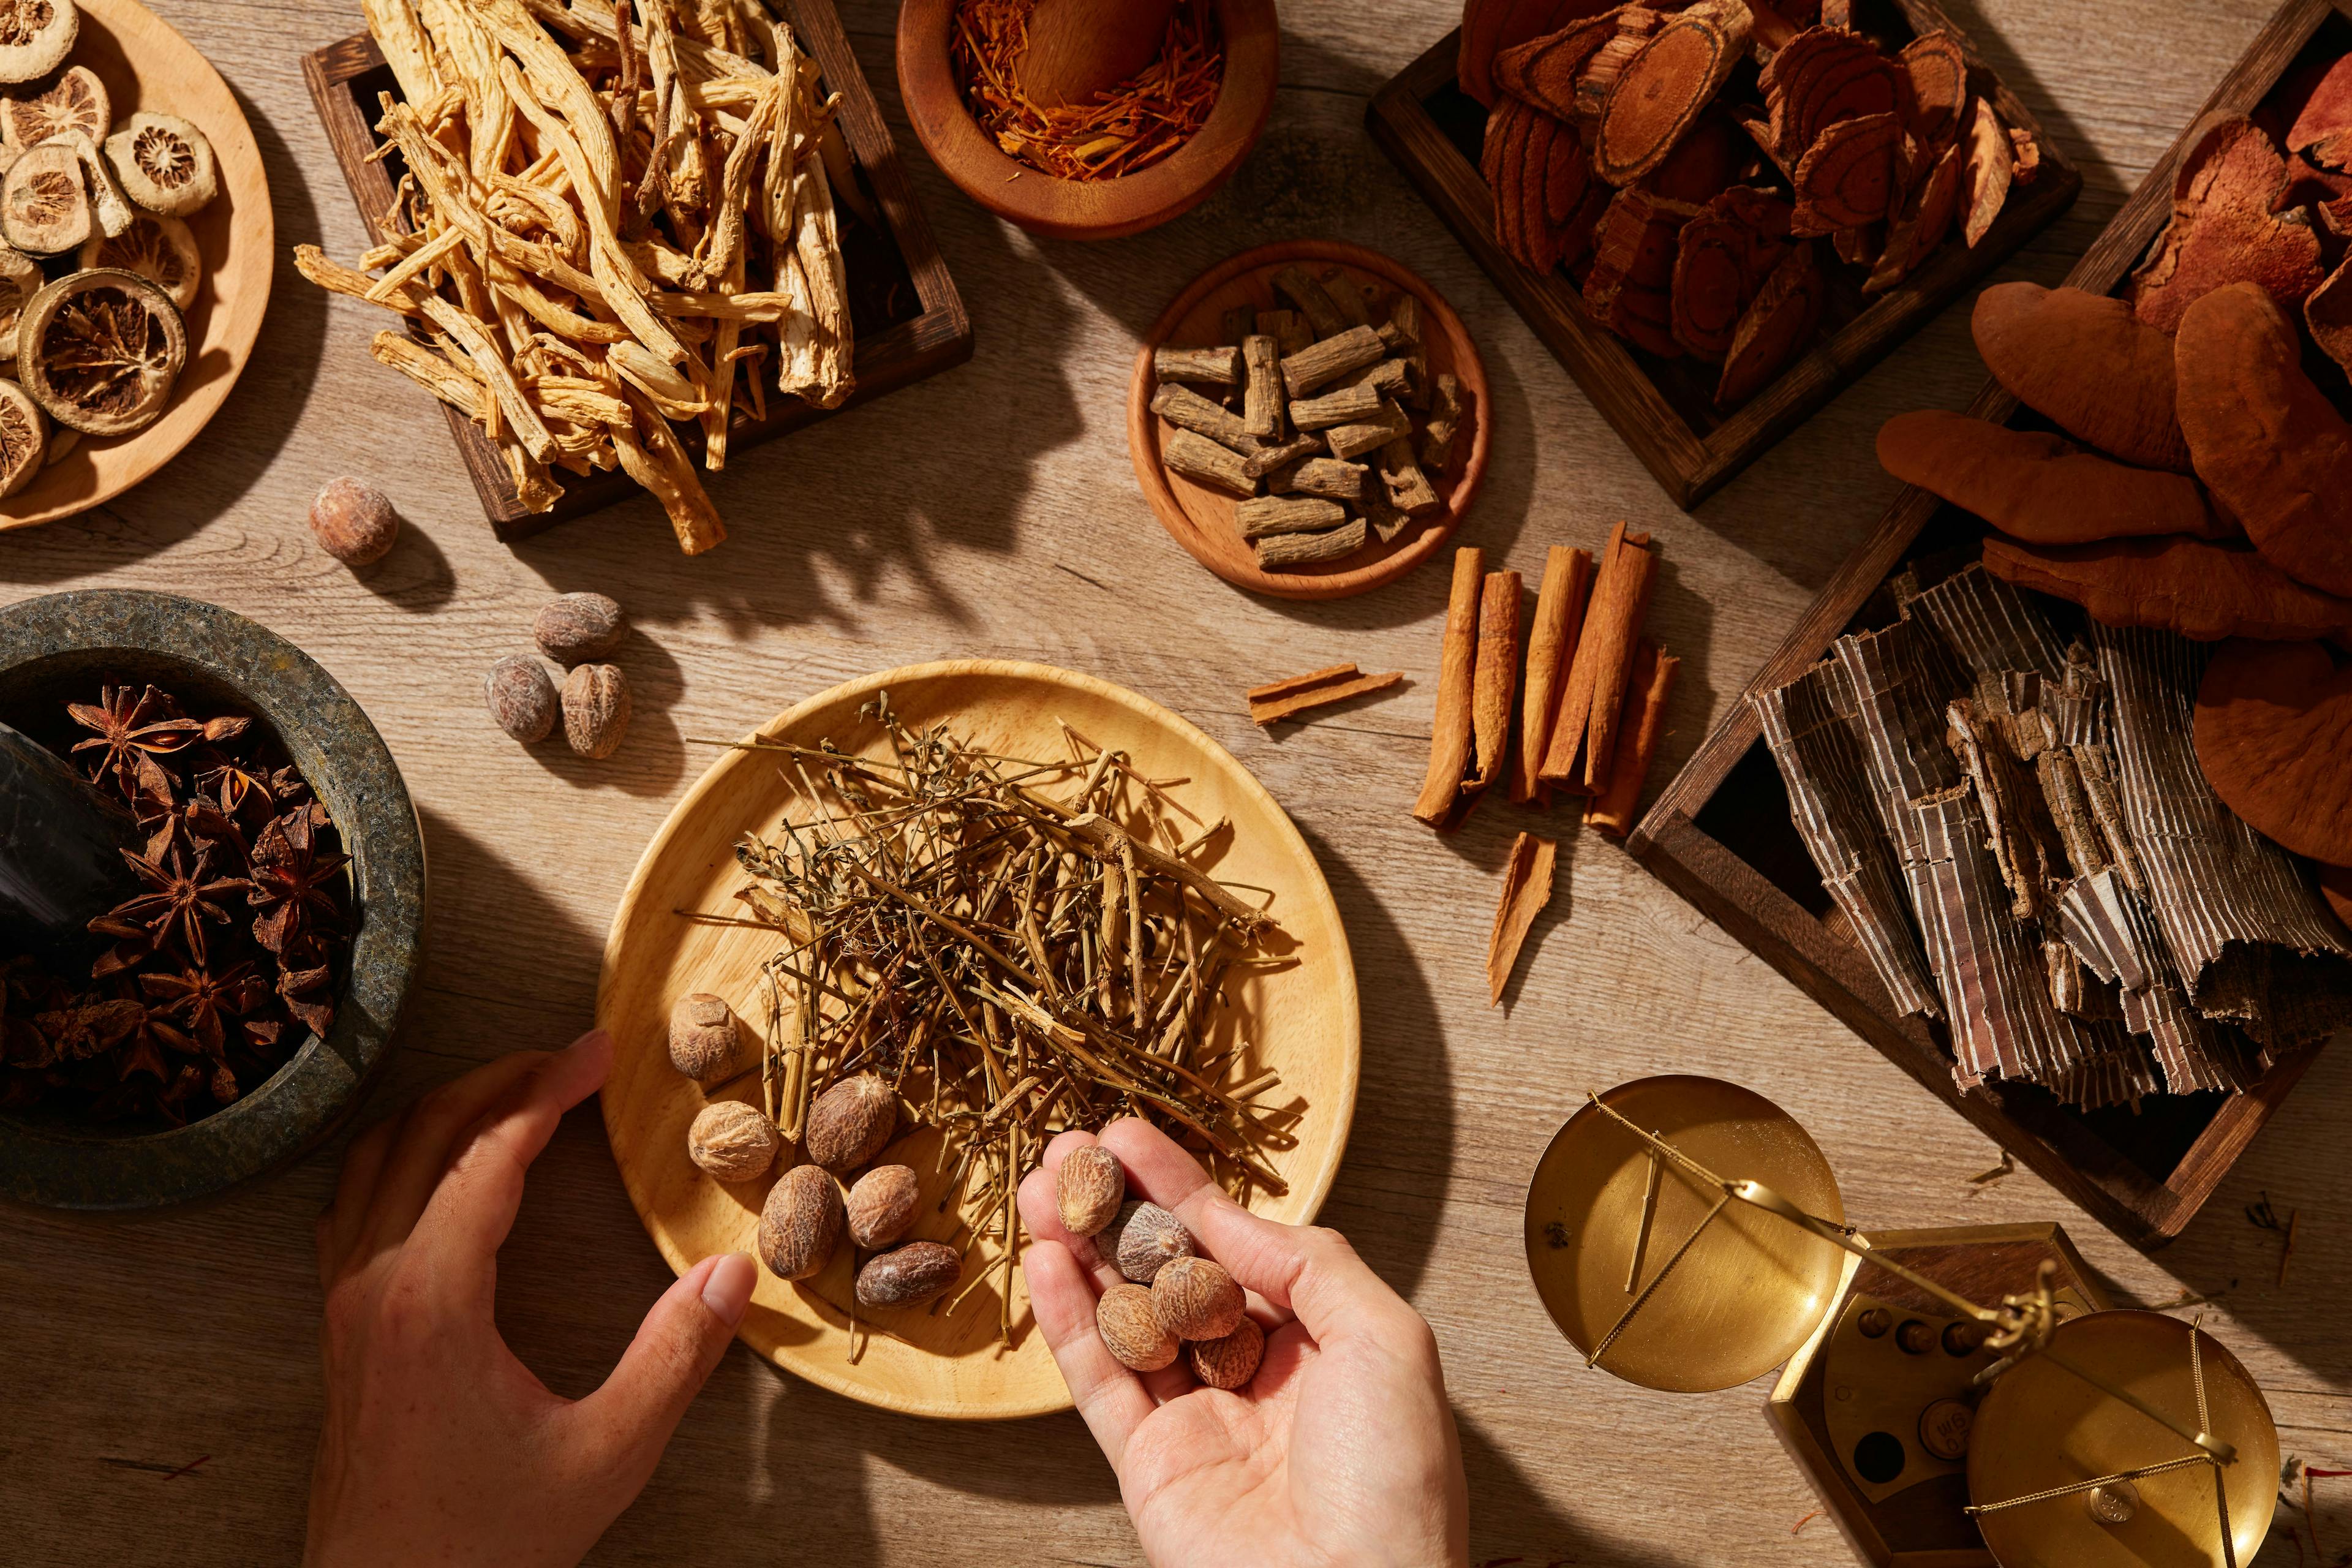 Traditional chinese medicine with herb and spices in brown wooden background mortar and pestile, for medicine advertising , photography traditional medicine content | Image Credit: © Tuan Nguyen - stock.adobe.com